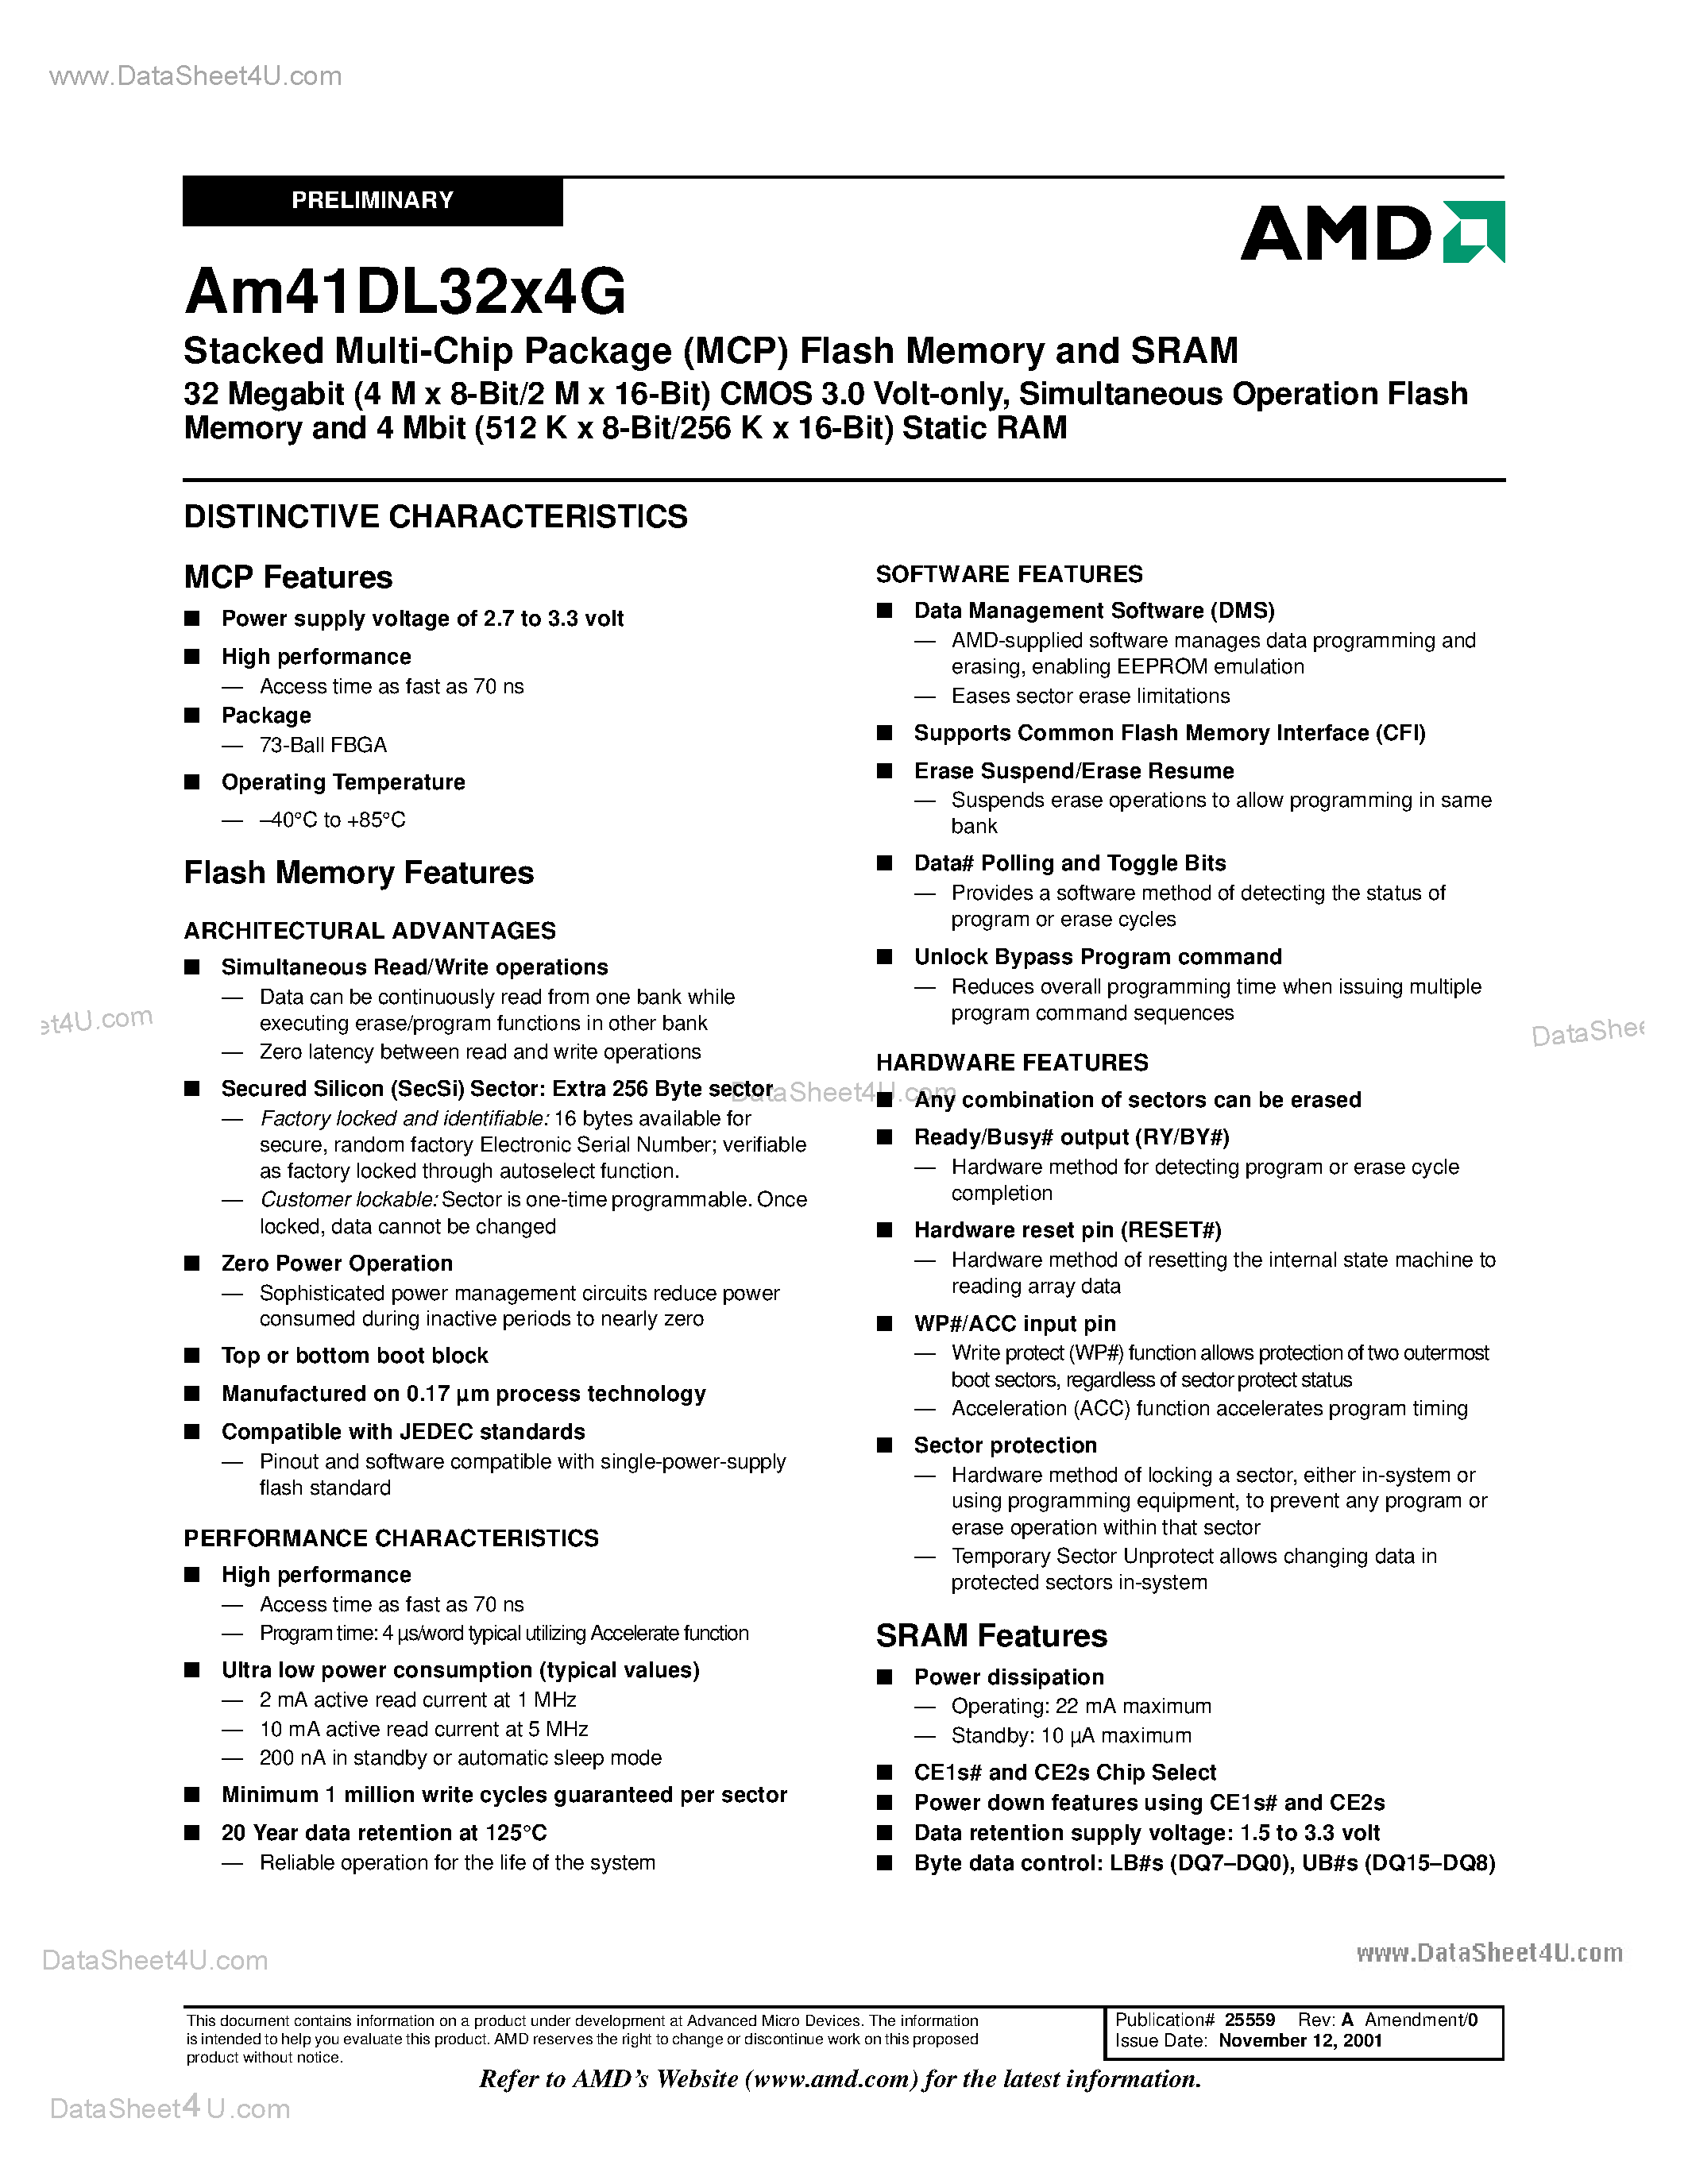 Datasheet AM41DL32X4G - Stacked Multi-Chip Package (MCP) Flash Memory and SRAM page 2